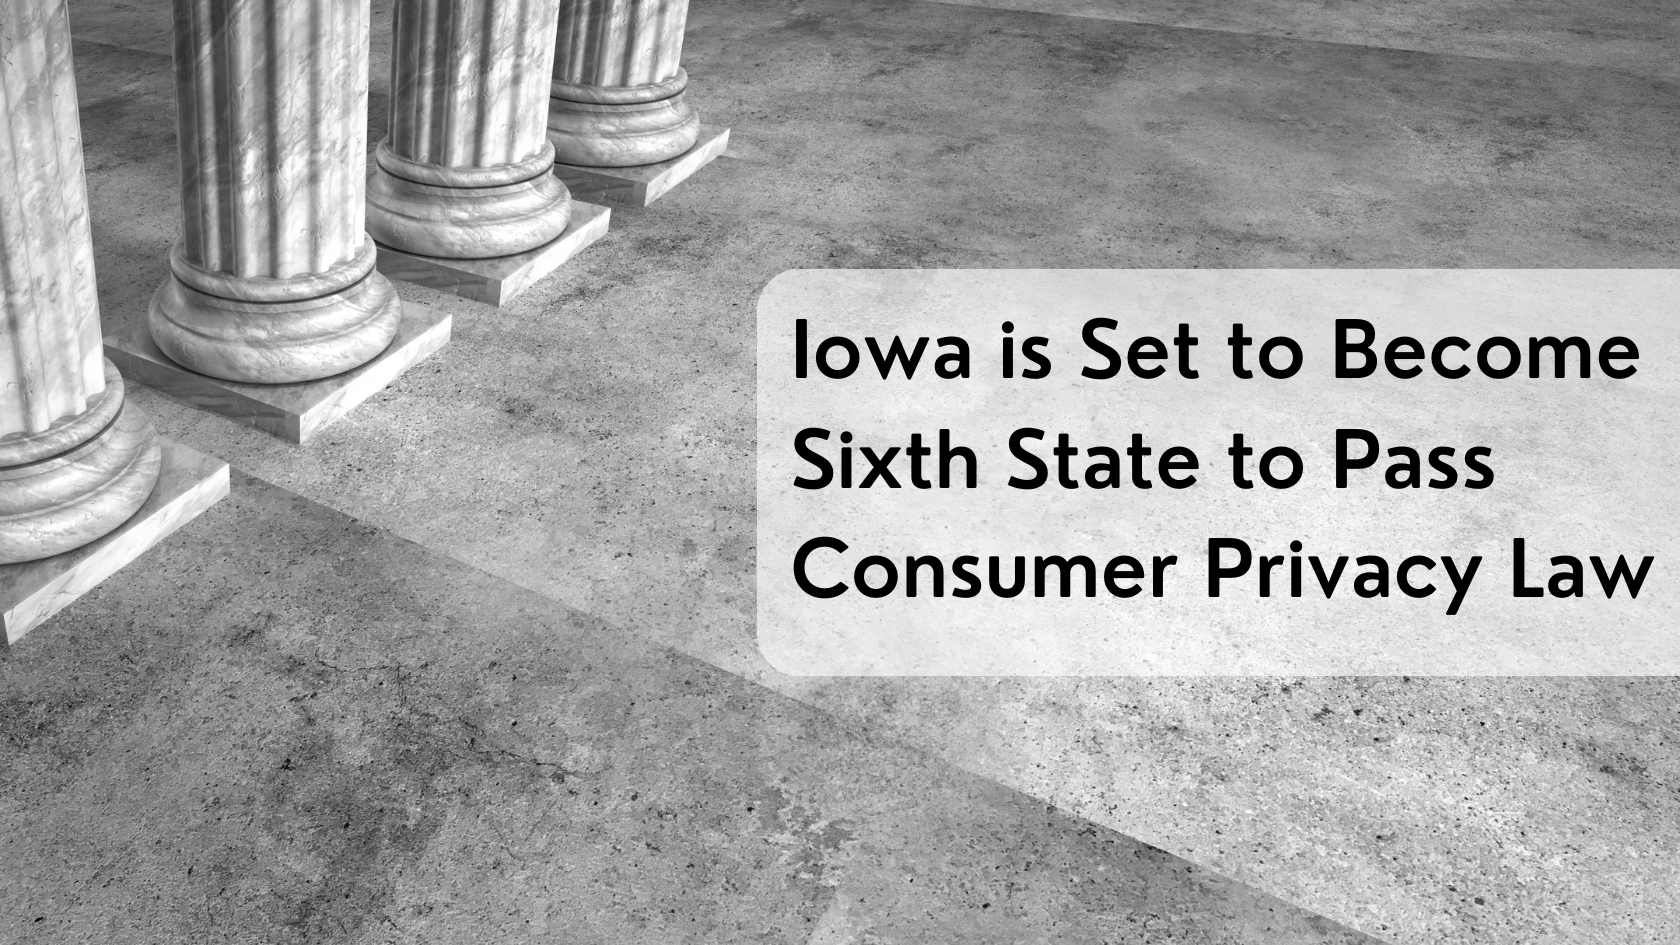 Iowa is Set to Become Sixth State to Pass Consumer Privacy Law